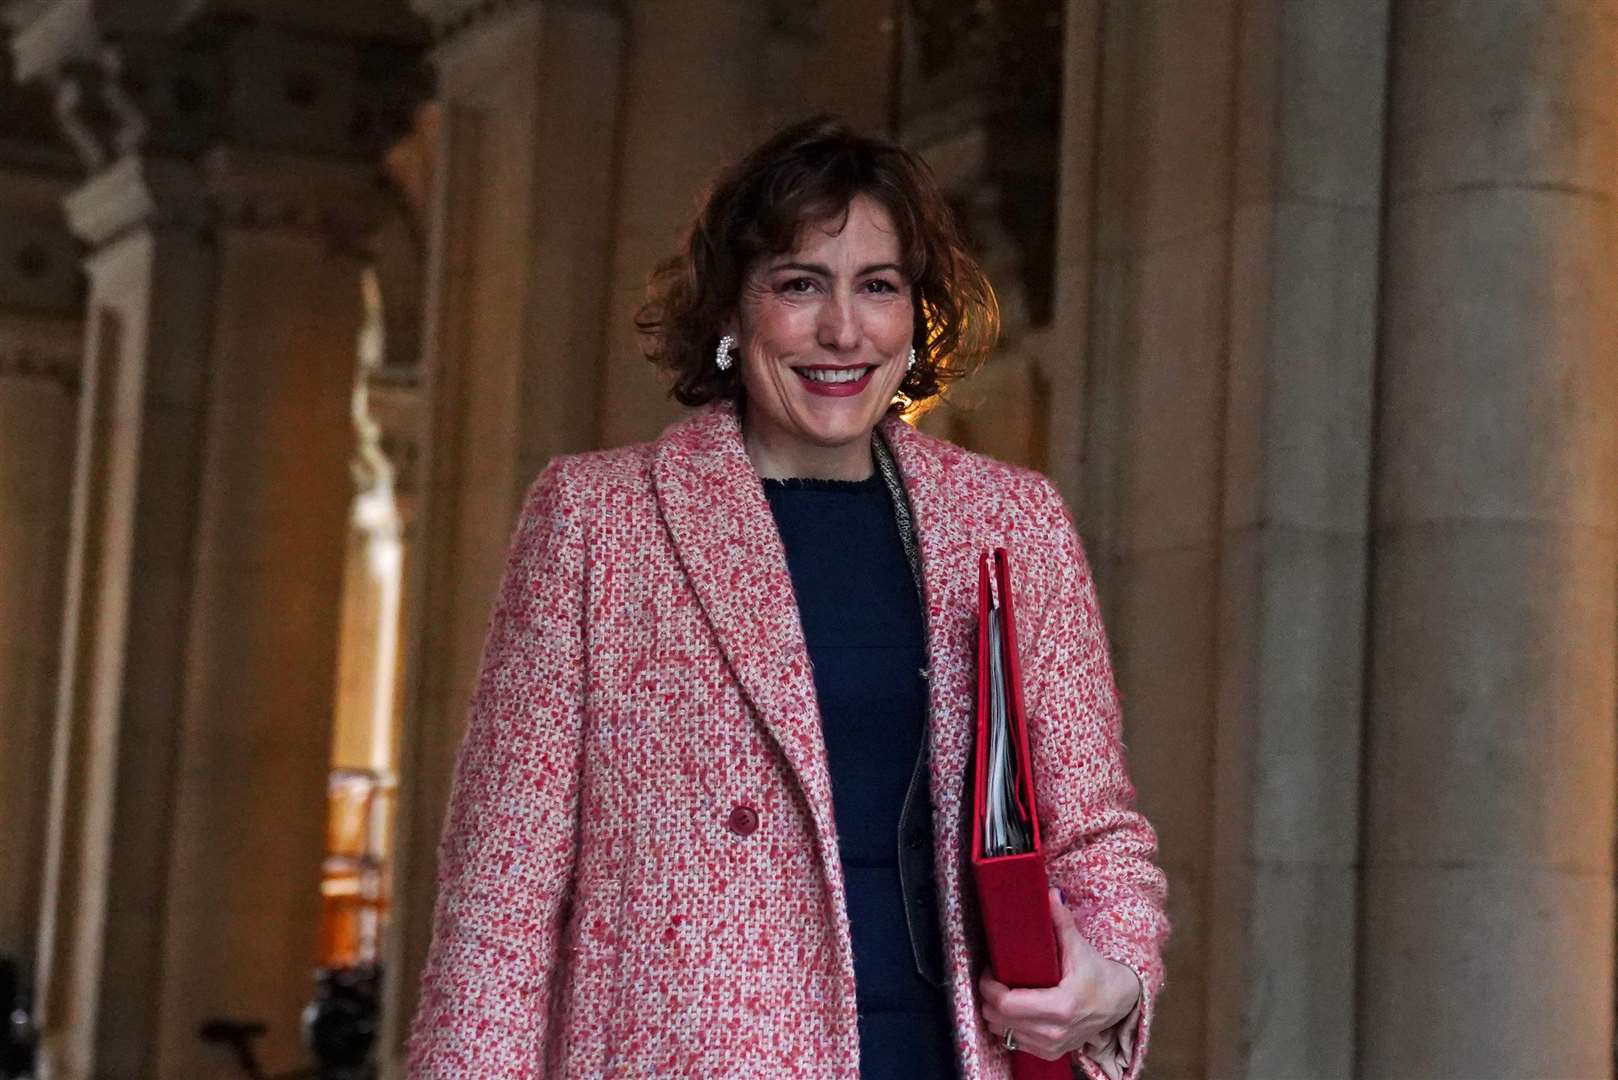 Health Secretary Victoria Atkins said the latest strike is ‘not in the spirit of constructive dialogue’ to end the dispute (Victoria Jones/PA)